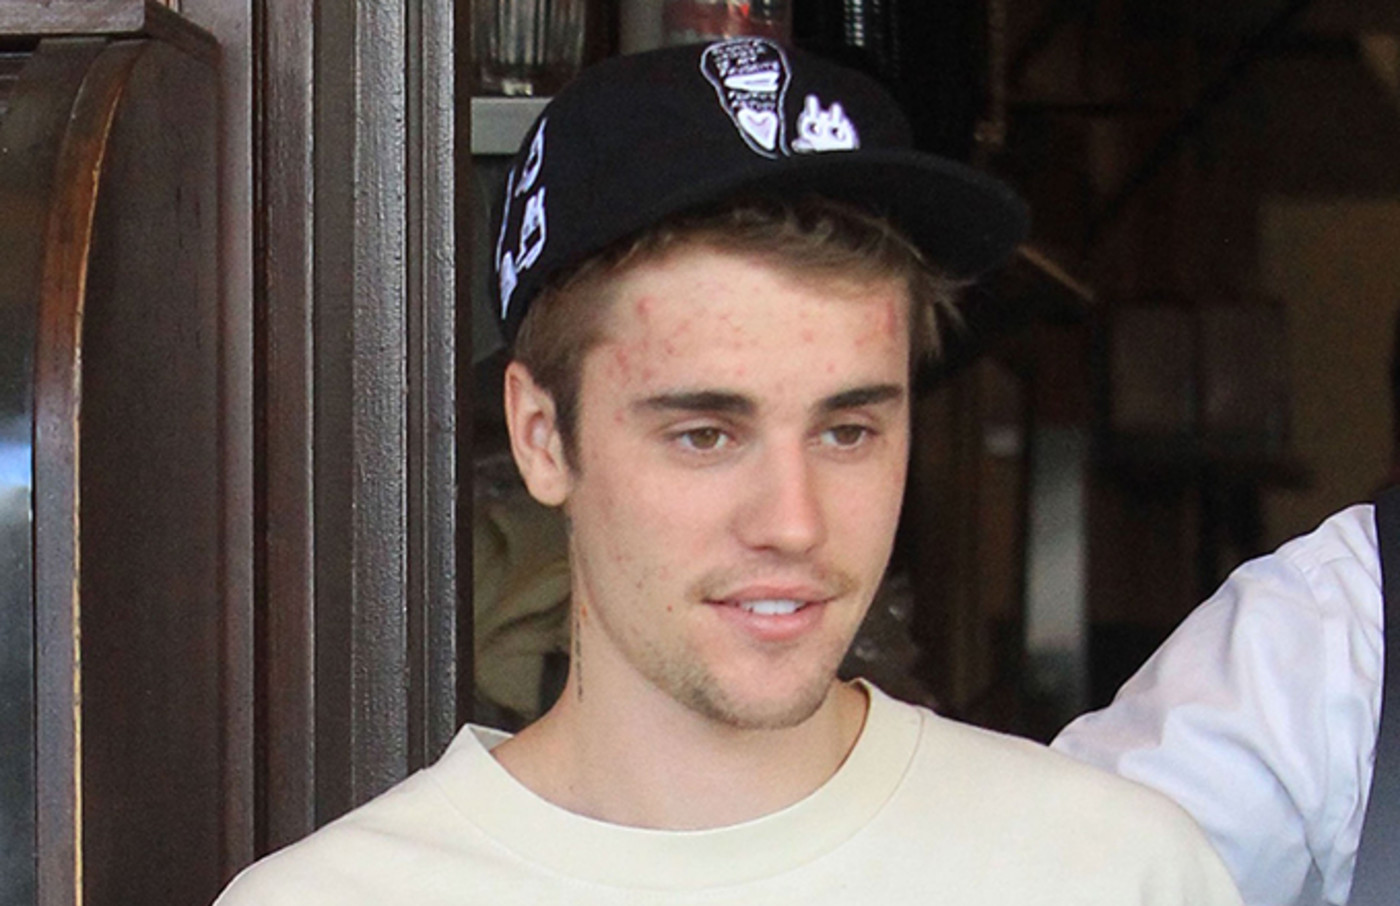 Justin Bieber sued by Richard Barbera over photo on Instagram